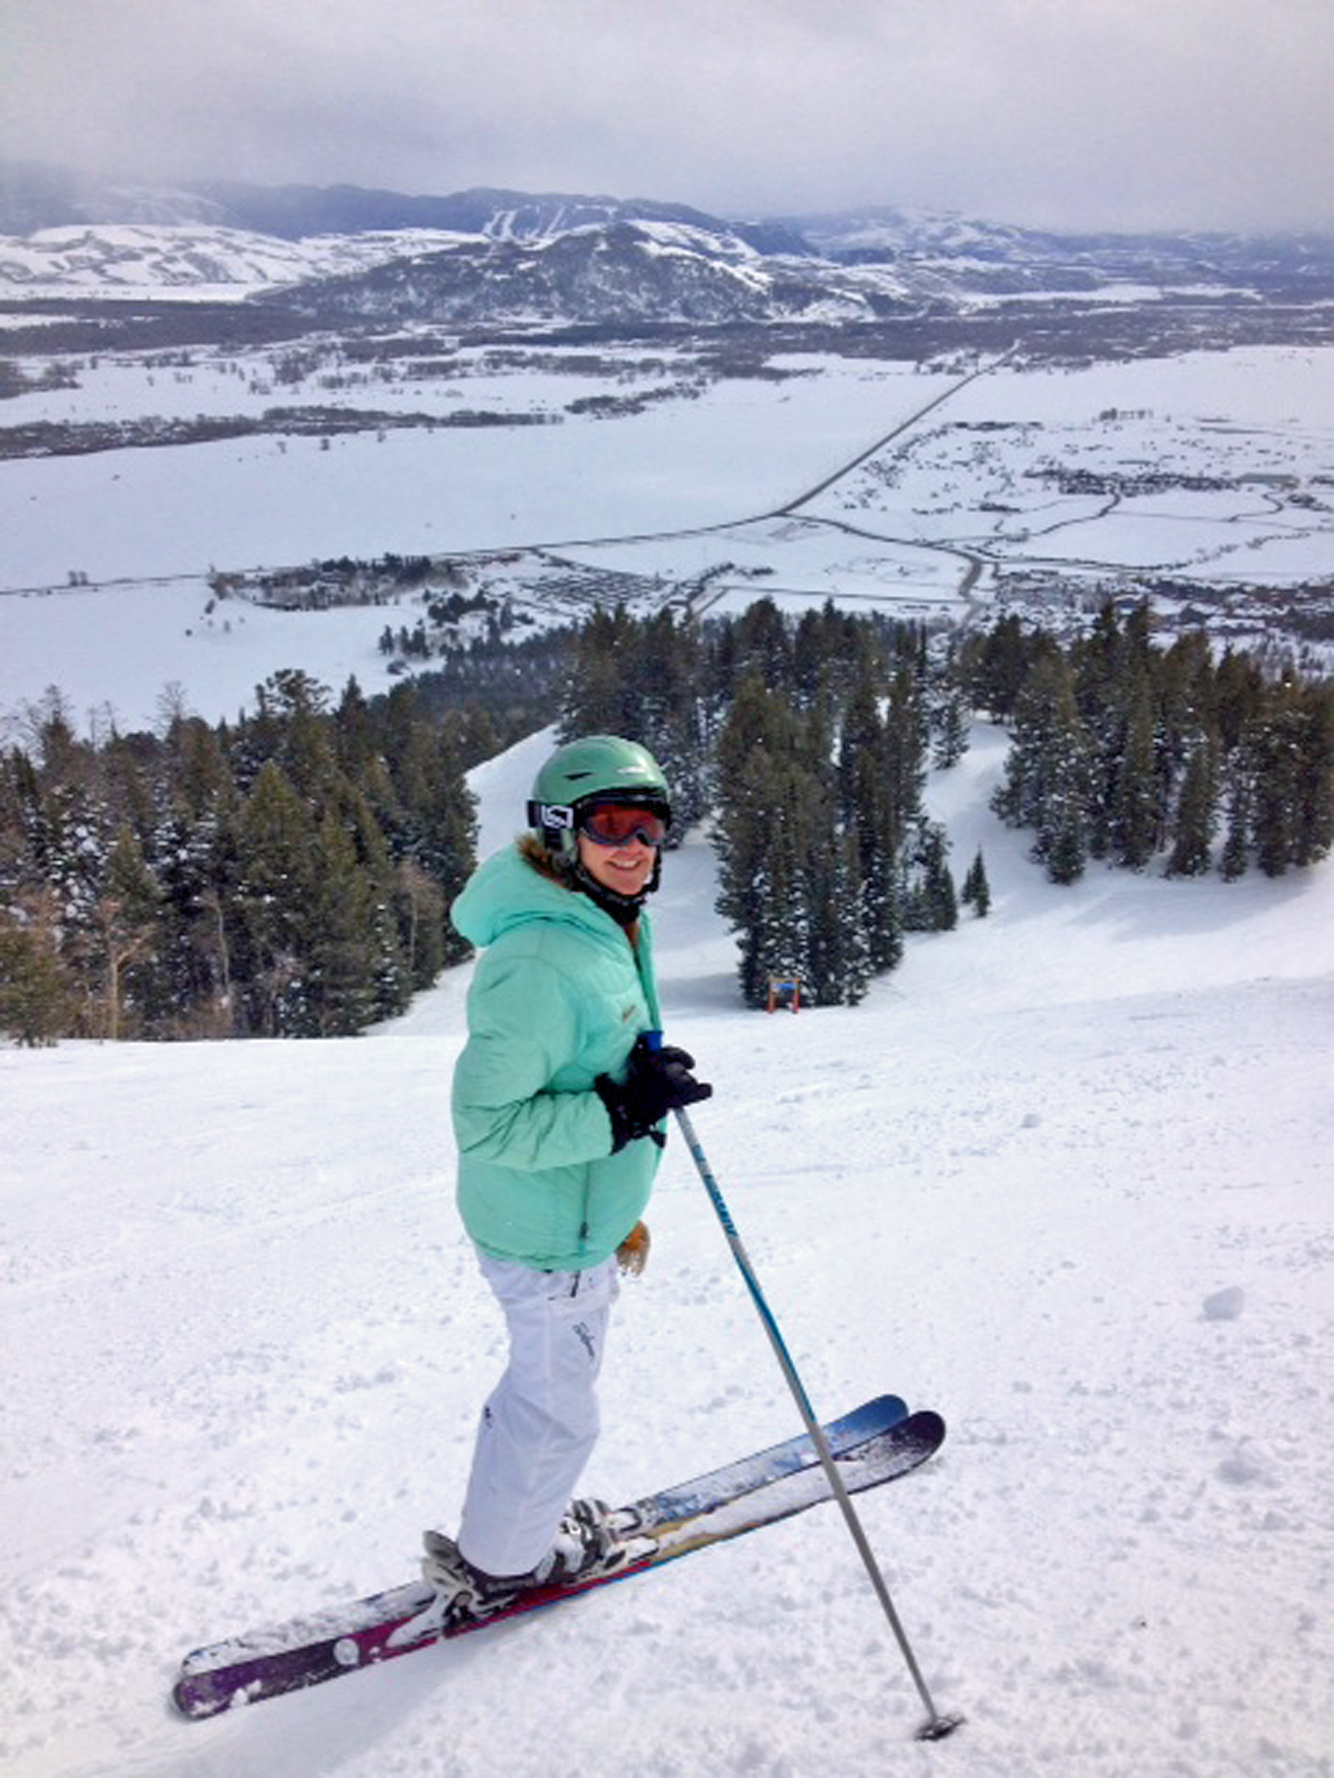 WordenGroup PR founding principal Darla Worden pauses on the slopes at Jackson Hole Mountain Resort. With offices in Jackson and Denver, Worden represents clients across the Mountain West.